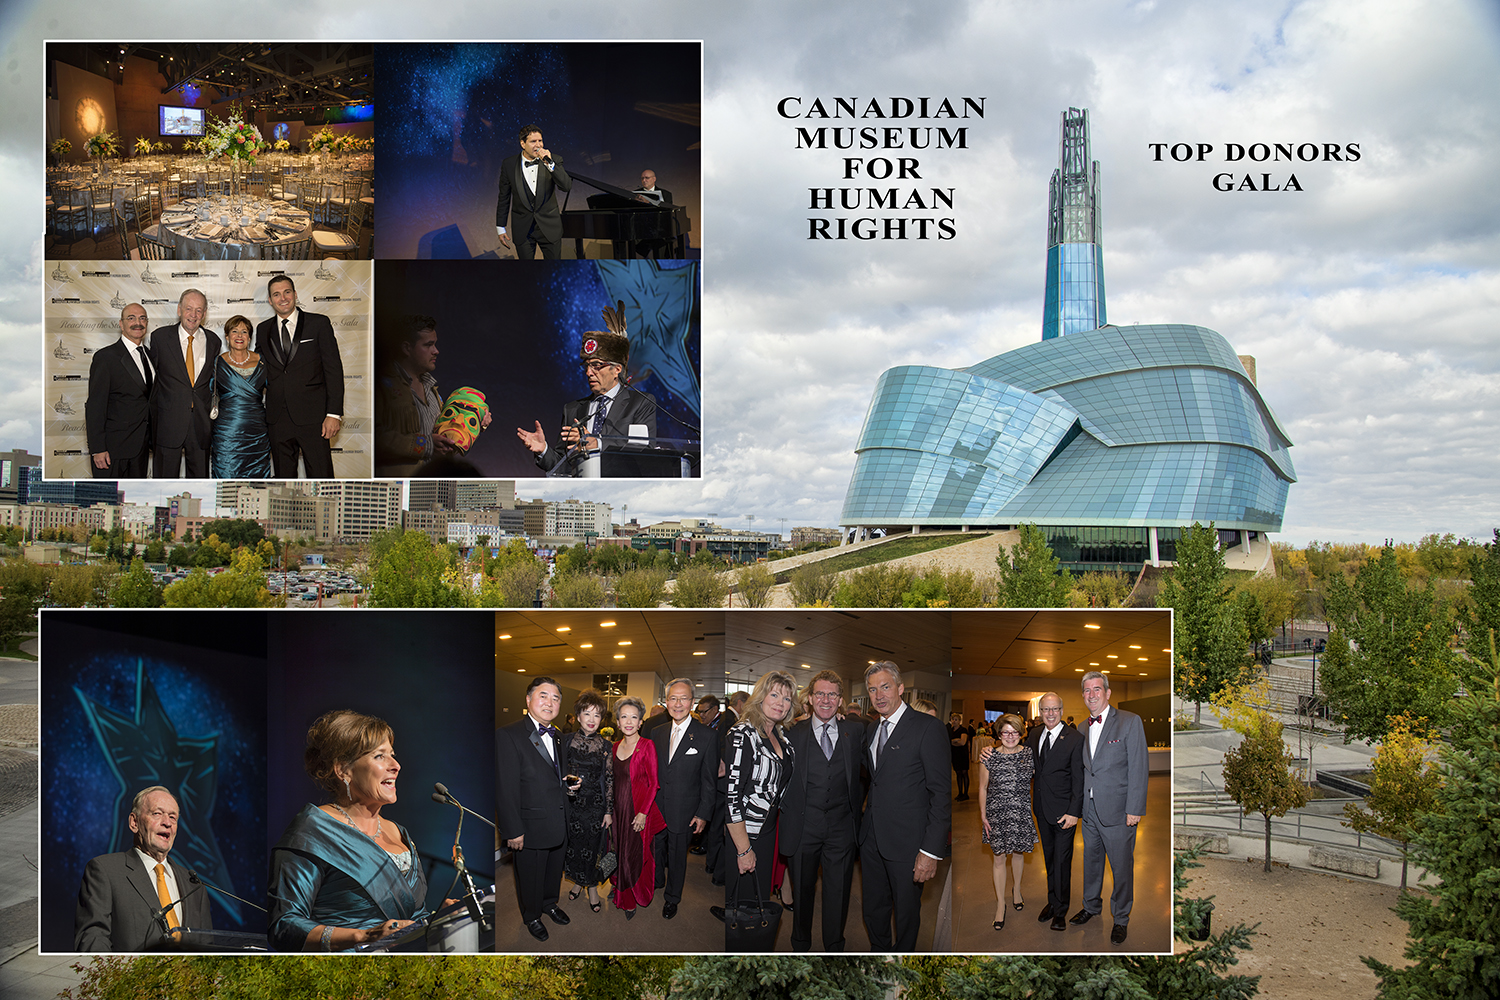 Top Donor Gala at the Canadian Museum For Human Rights